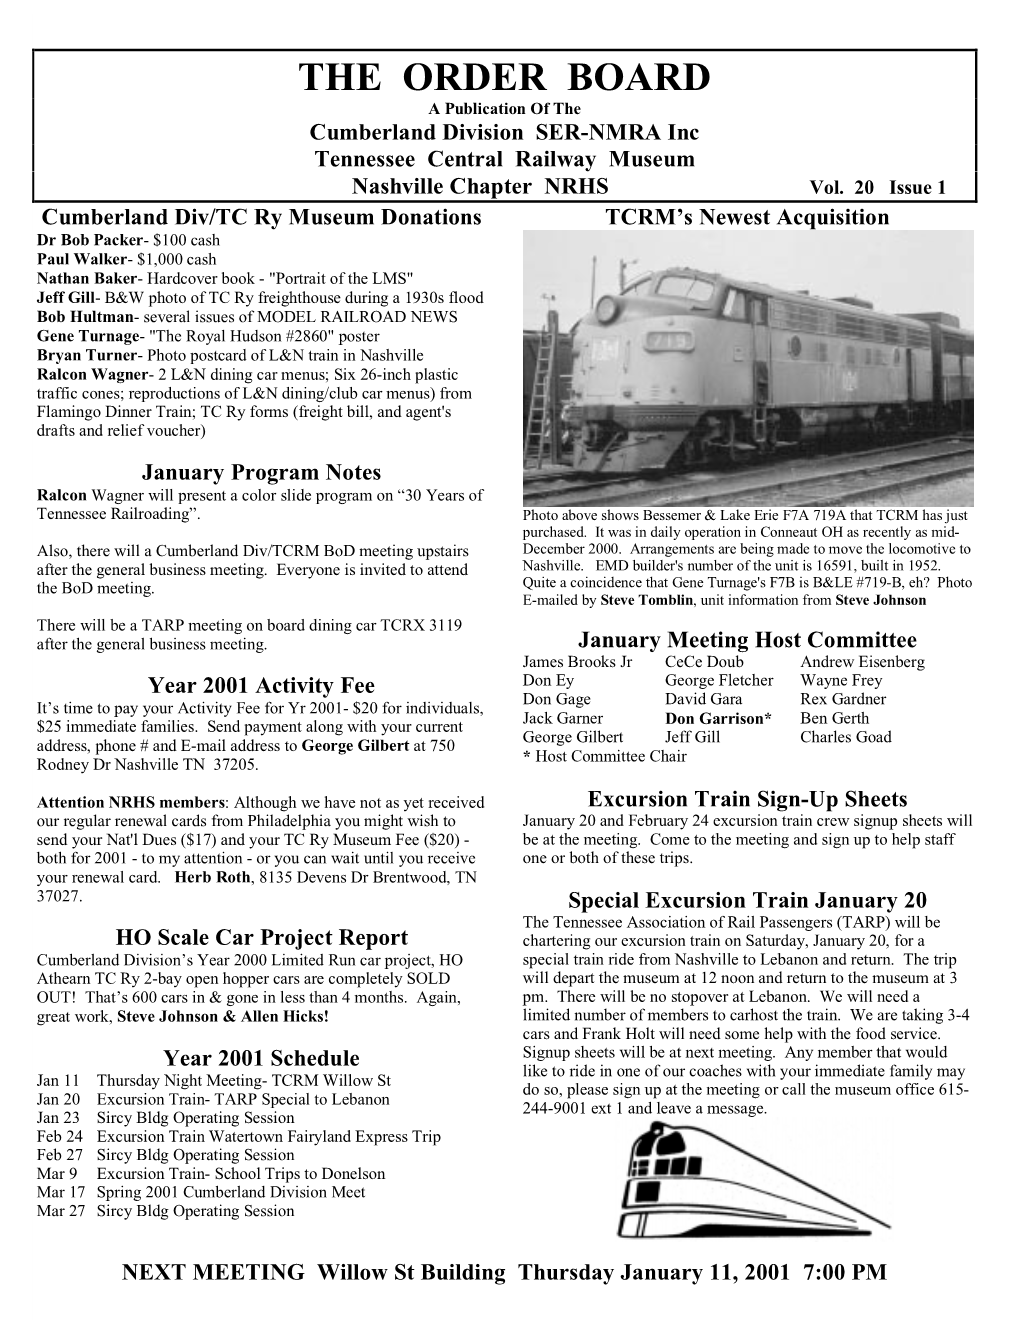 THE ORDER BOARD a Publication of the Cumberland Division SER-NMRA Inc Tennessee Central Railway Museum Nashville Chapter NRHS Vol